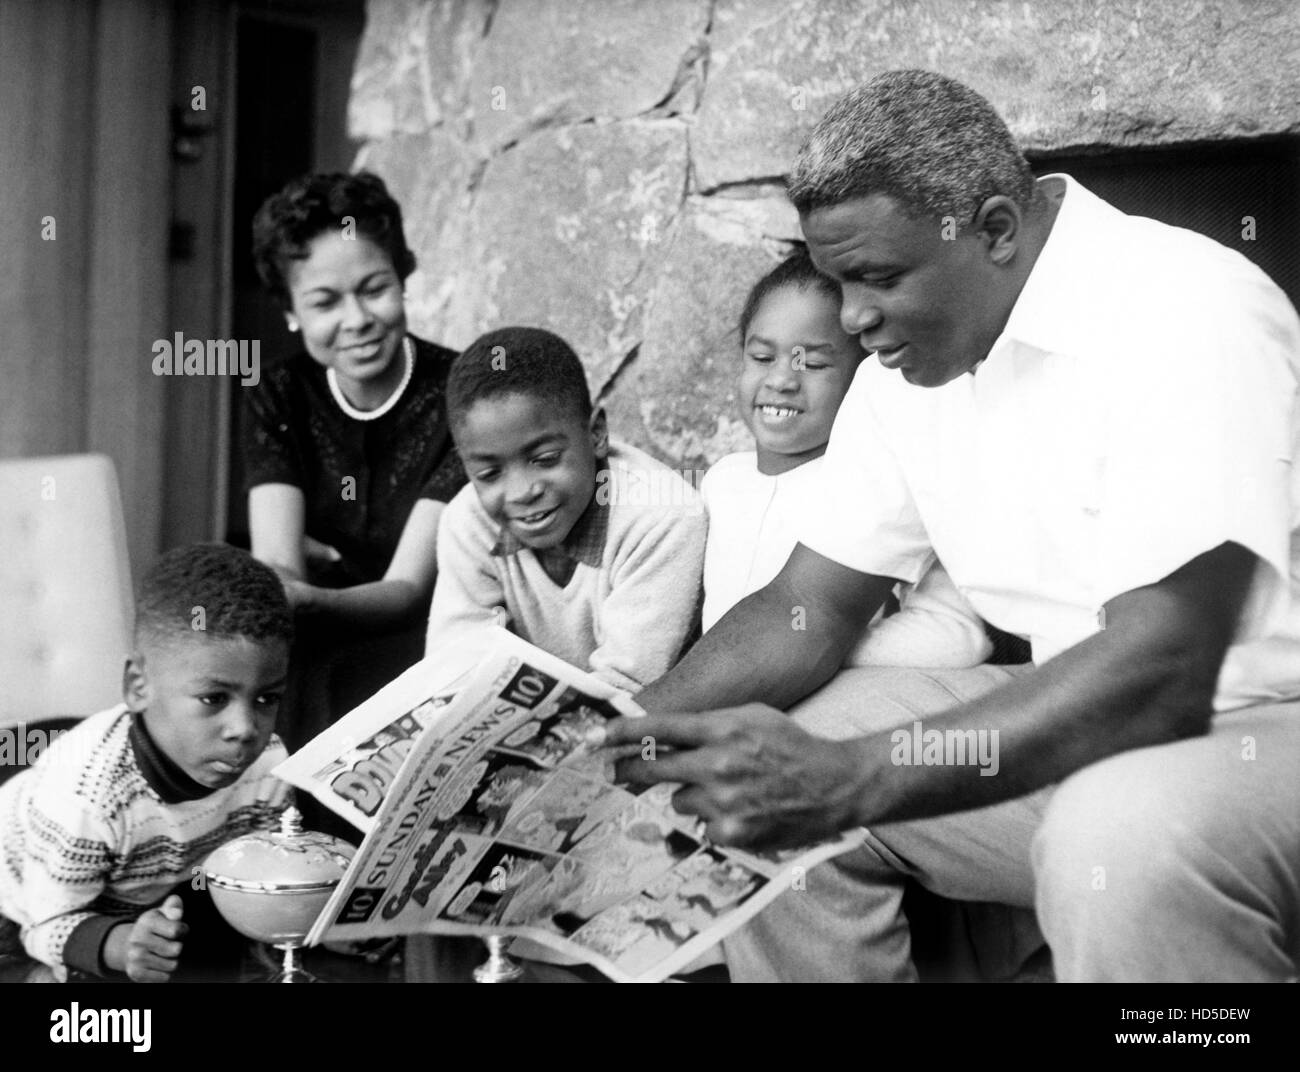 PERSON TO PERSON, baseball star Jackie Robinson (right) with his family from left: David Robinson, Rachel Robinson (rear), Stock Photo